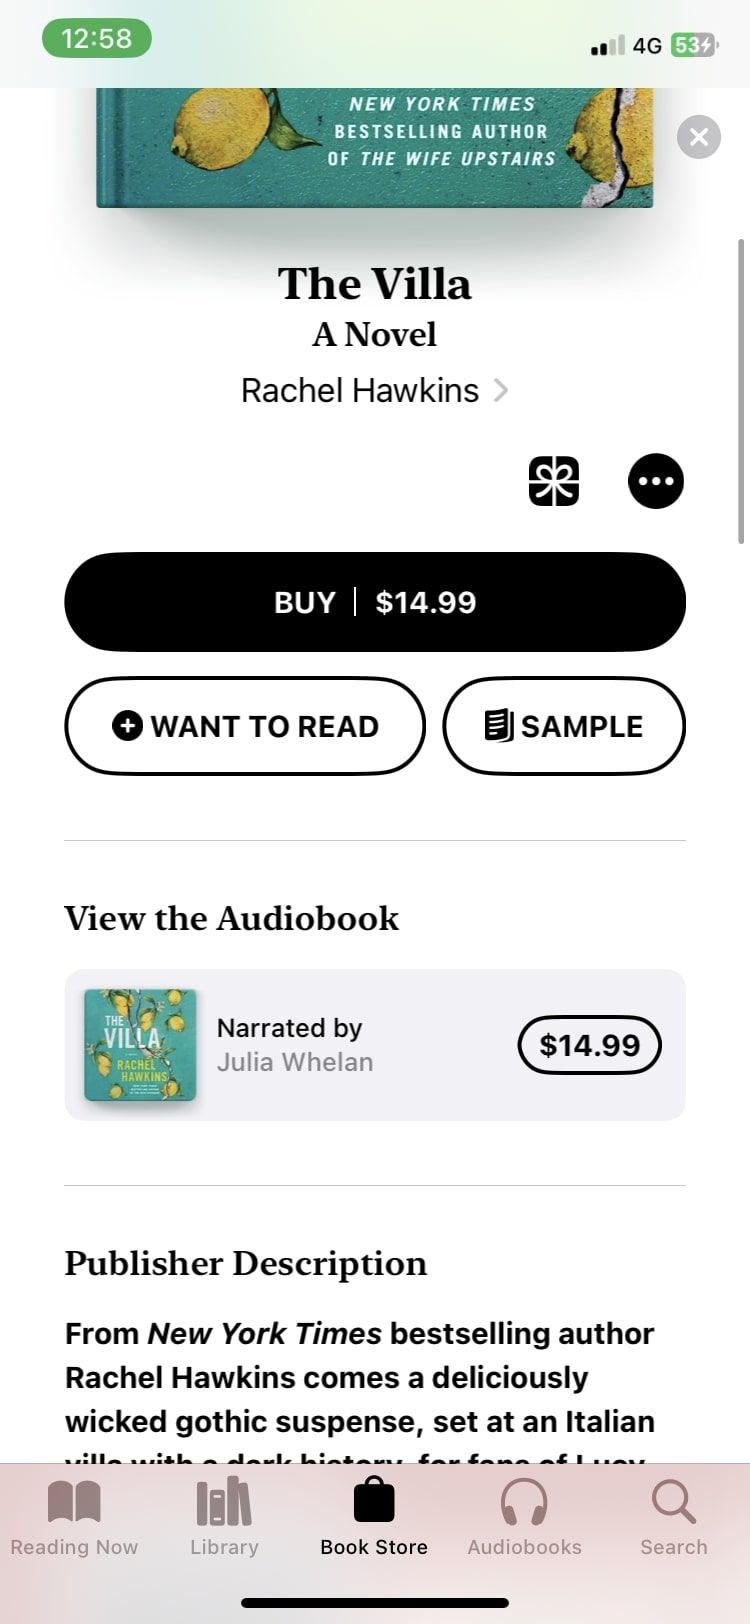 buy and view audiobook options in Apple Books